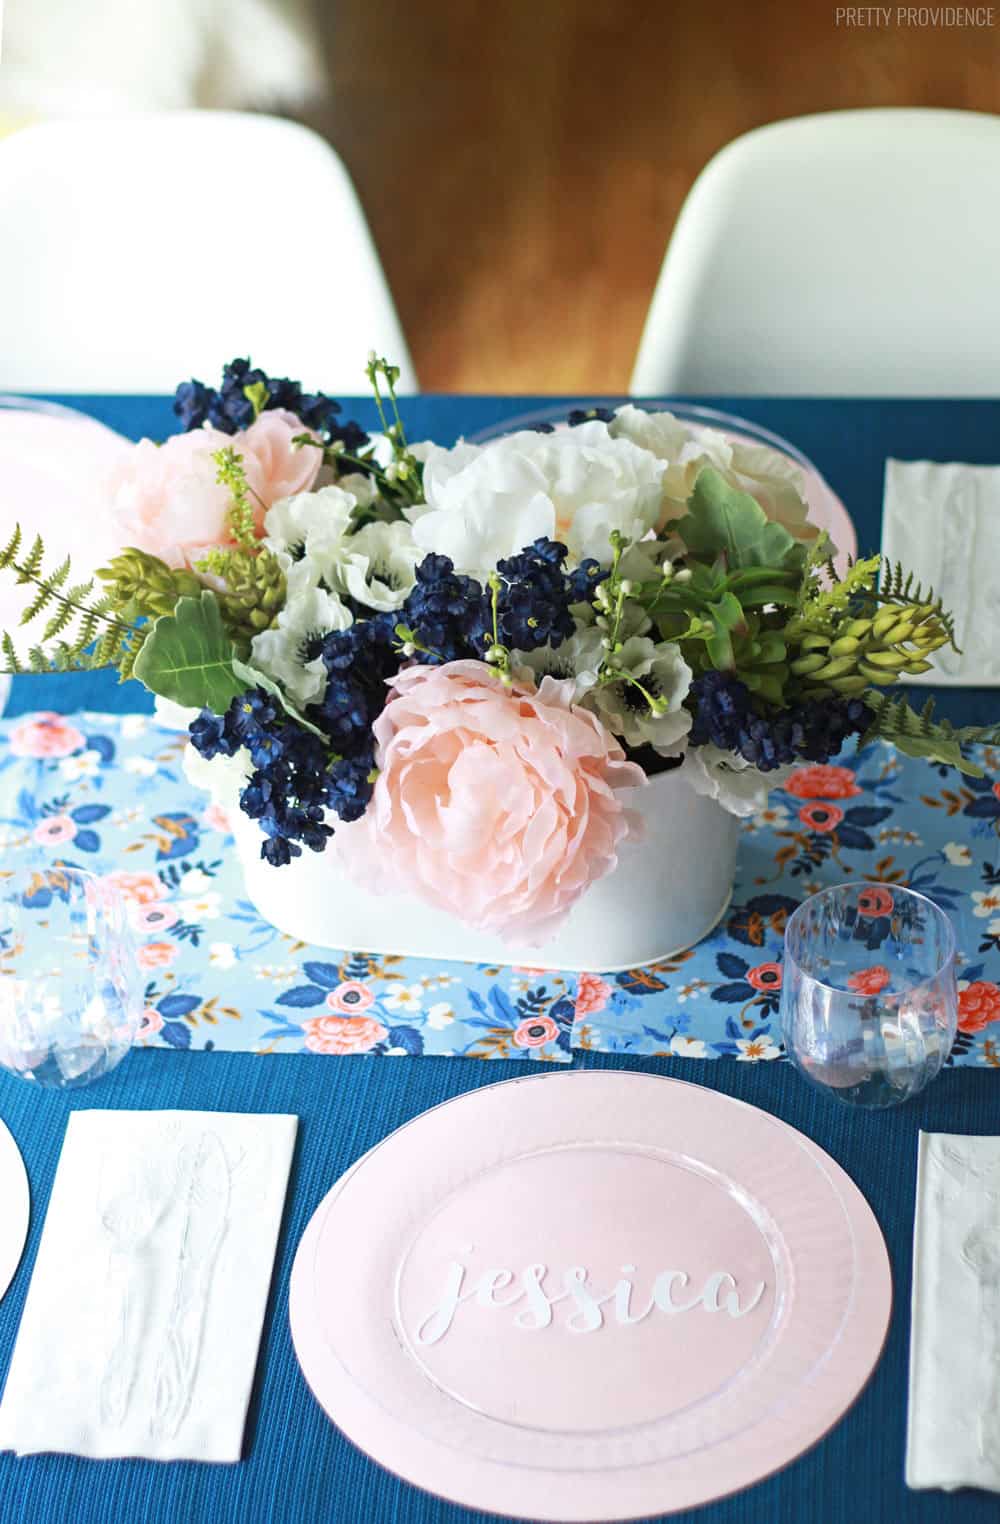 Super cute table settings with personalized name placemats under clear plates!!